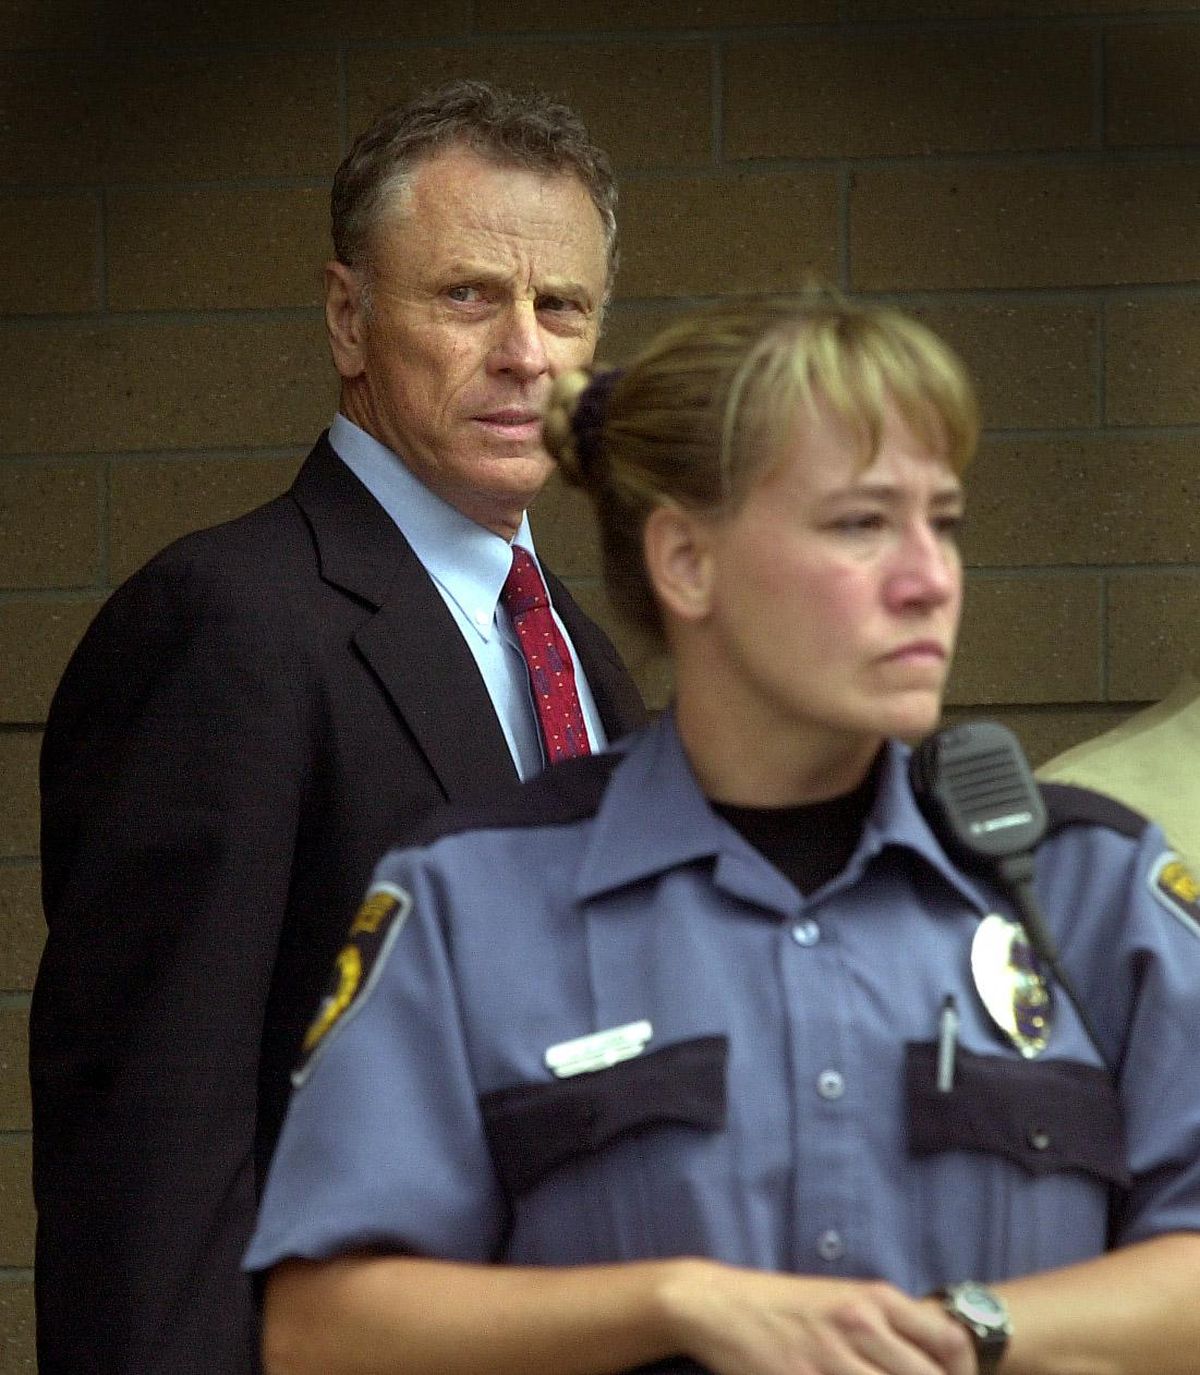 Morris Dees exits the Kootenai County Courthouse after the first day of trial in 2000. Dees represented two people chased and assaulted by the Aryan Nations. (Brian Plonka / The Spokesman-Review)